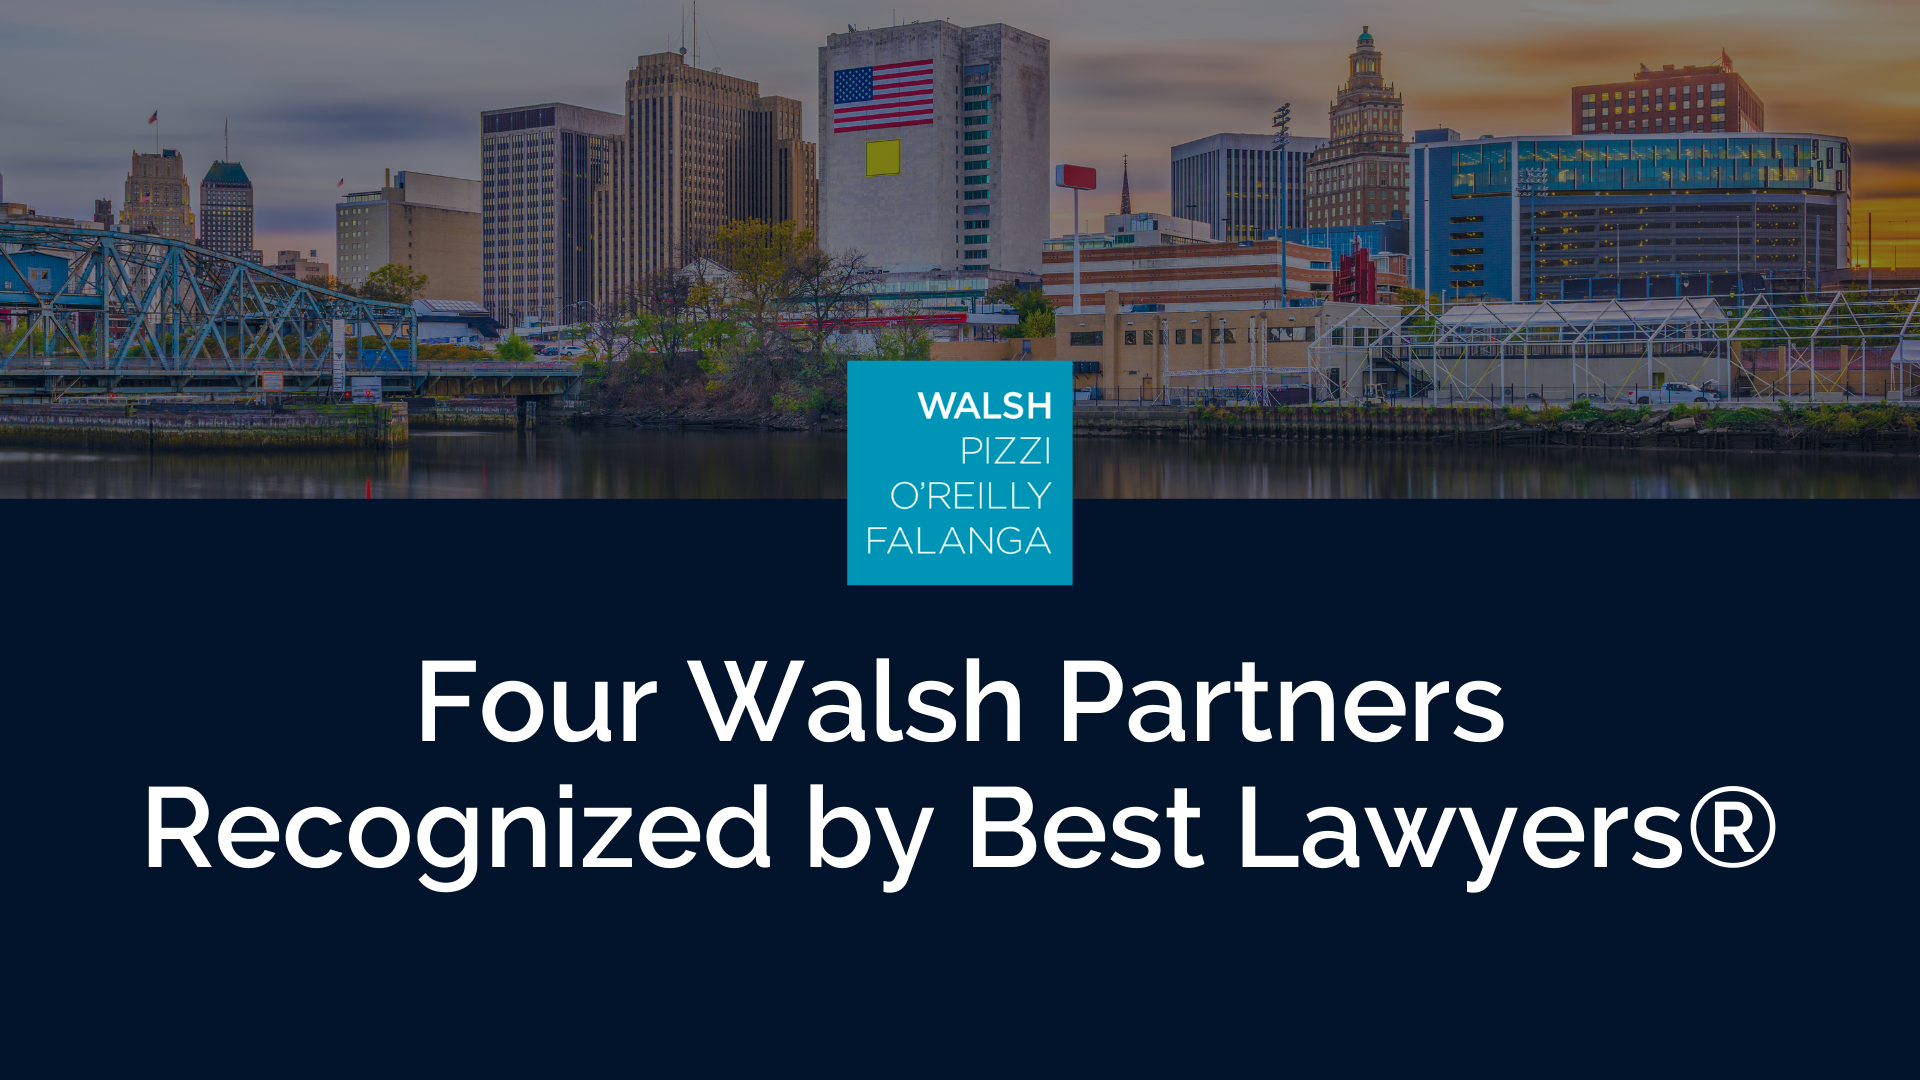 Newark NJ skyline with text below that says "Four Walsh Partners Recognized by Best Lawyers"